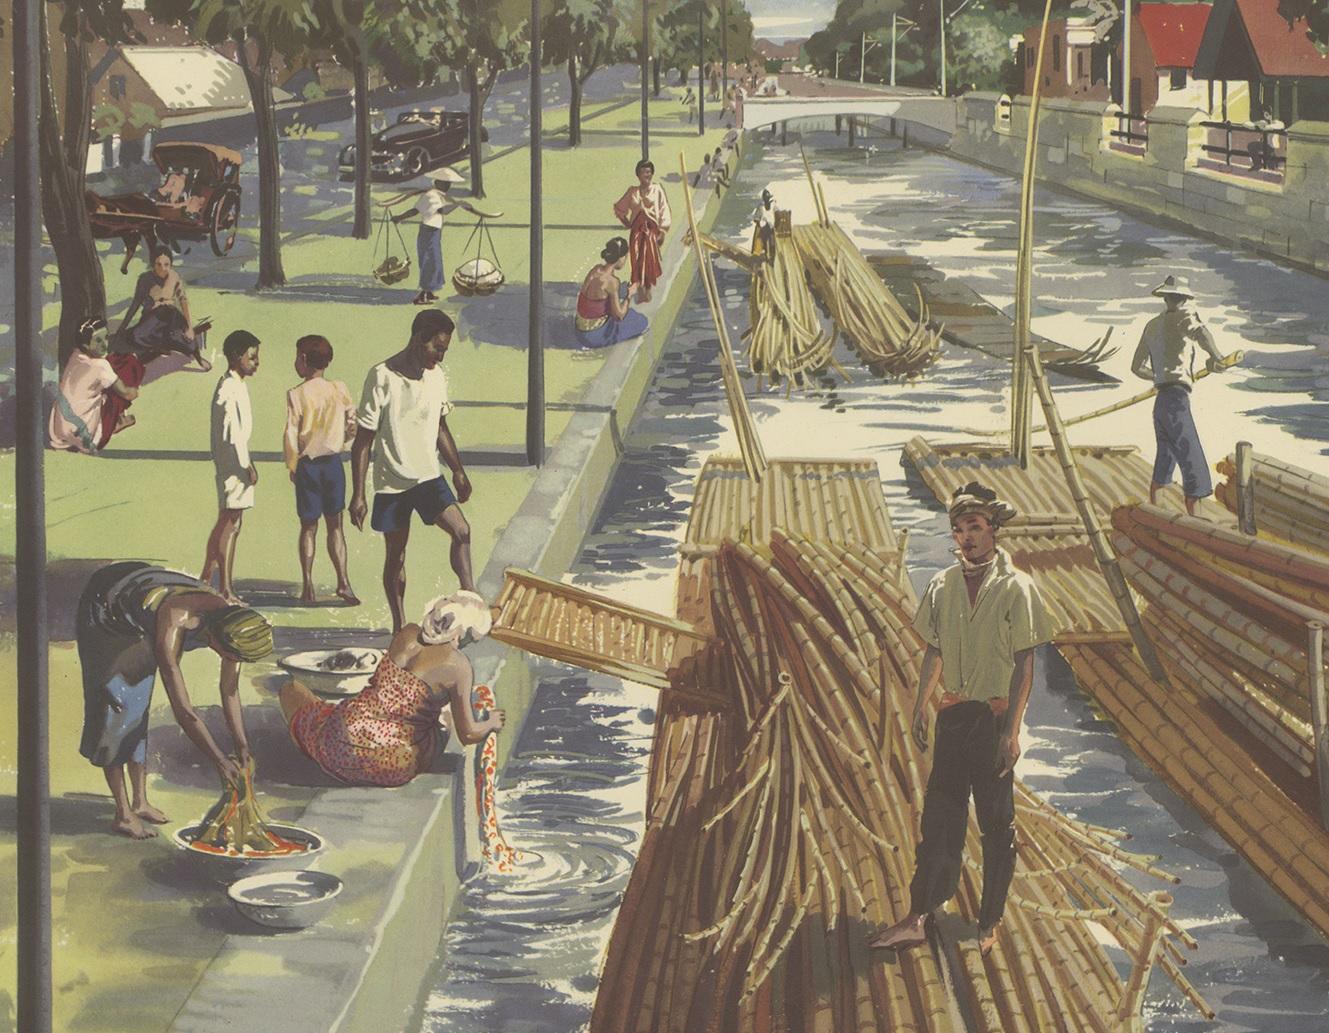 Vintage poster illustrating cane and bamboo being transported by boat in Java, Indonesia. Published by Macmillan after Mac Tatchell, circa 1960.